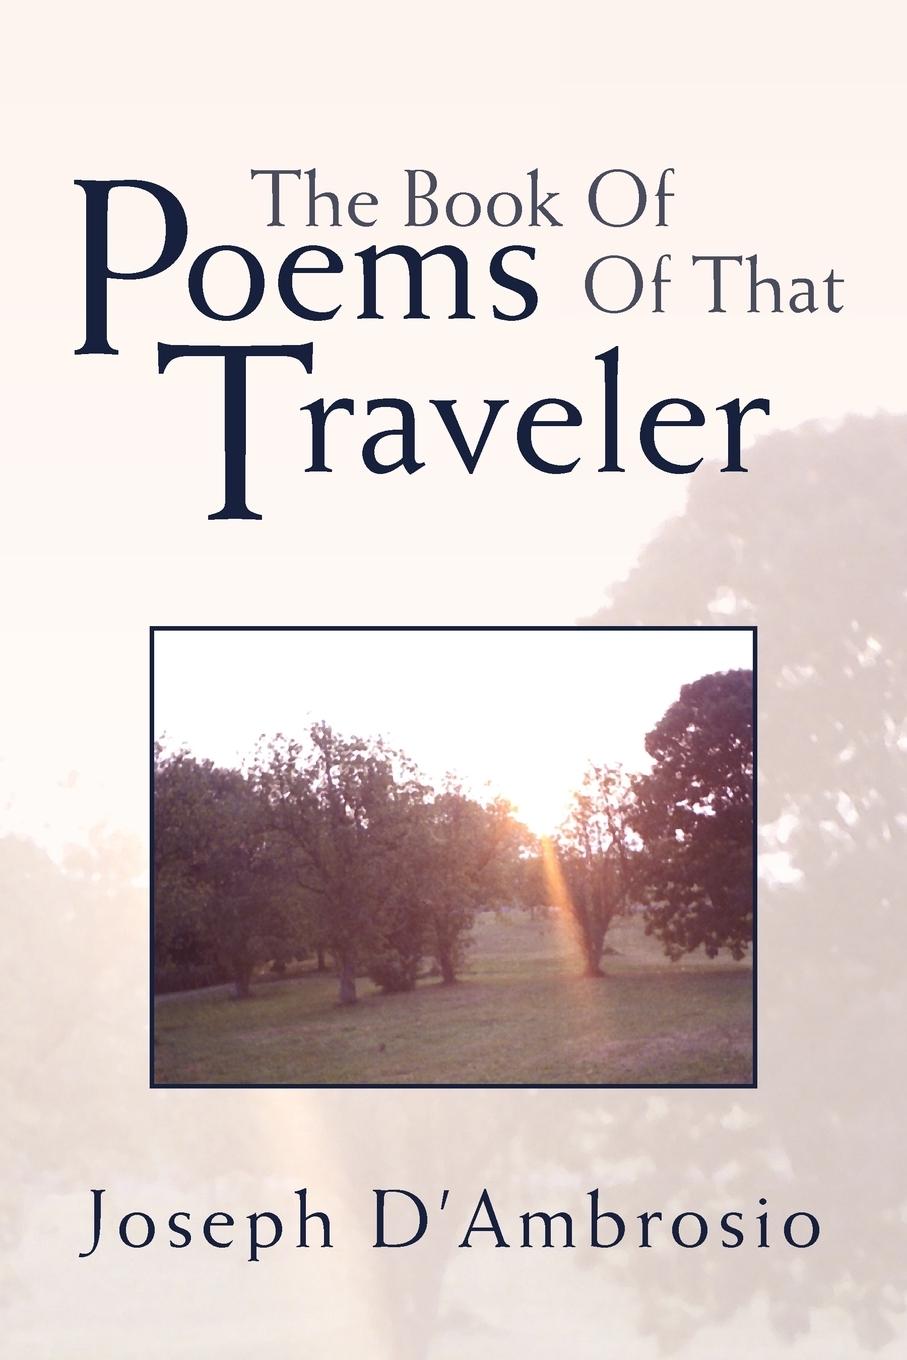 The Book Of Poems Of That Traveler - Joseph D Ambrosio